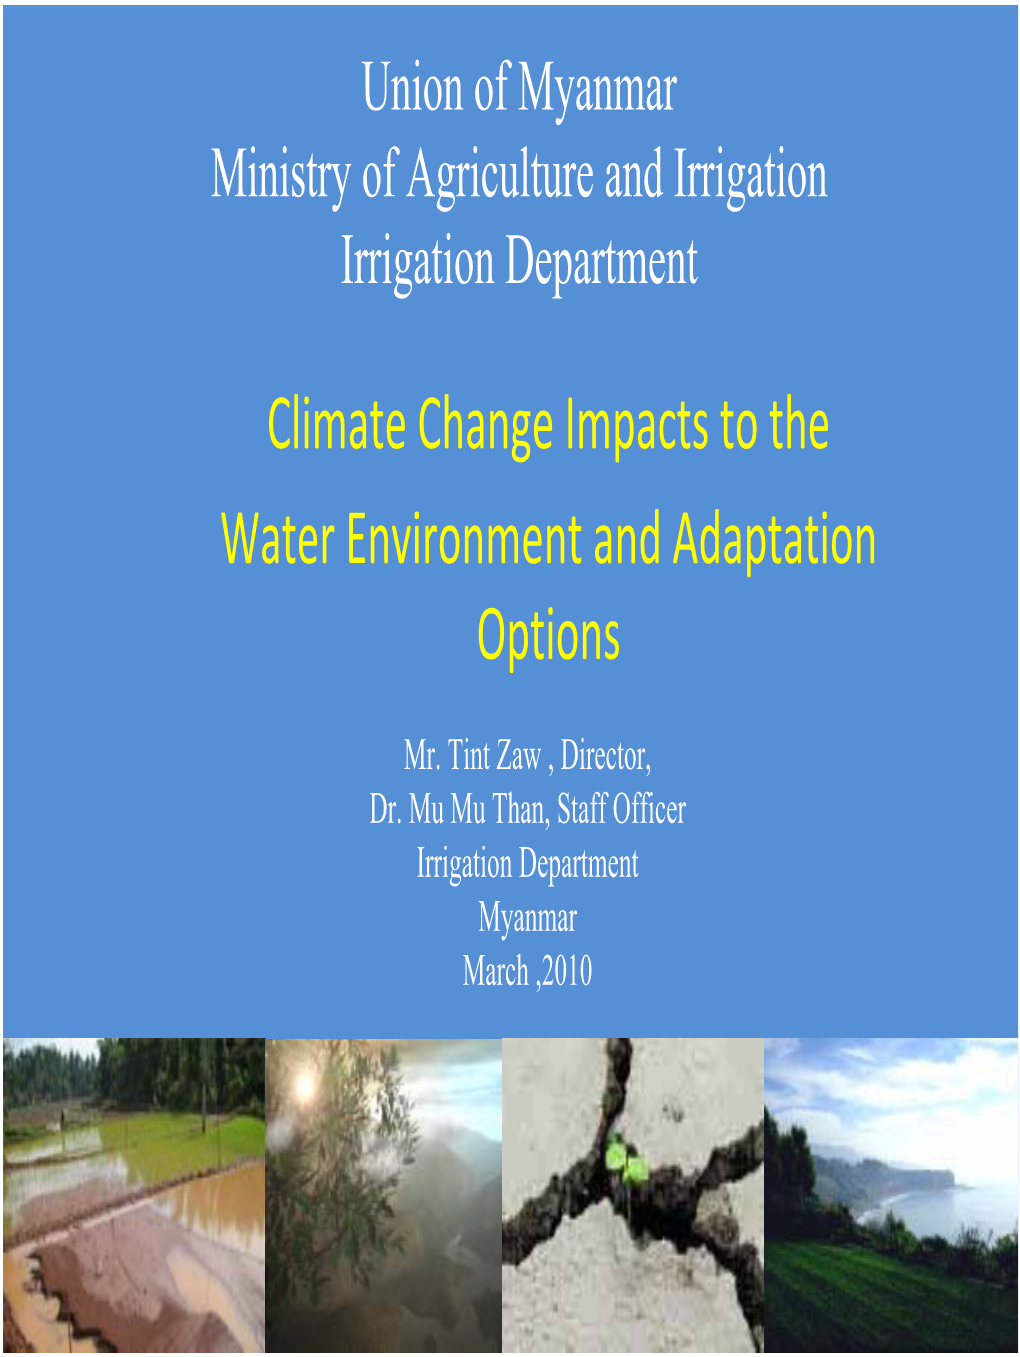 Climate Change Impacts to the Water Environment and Adaptation Options